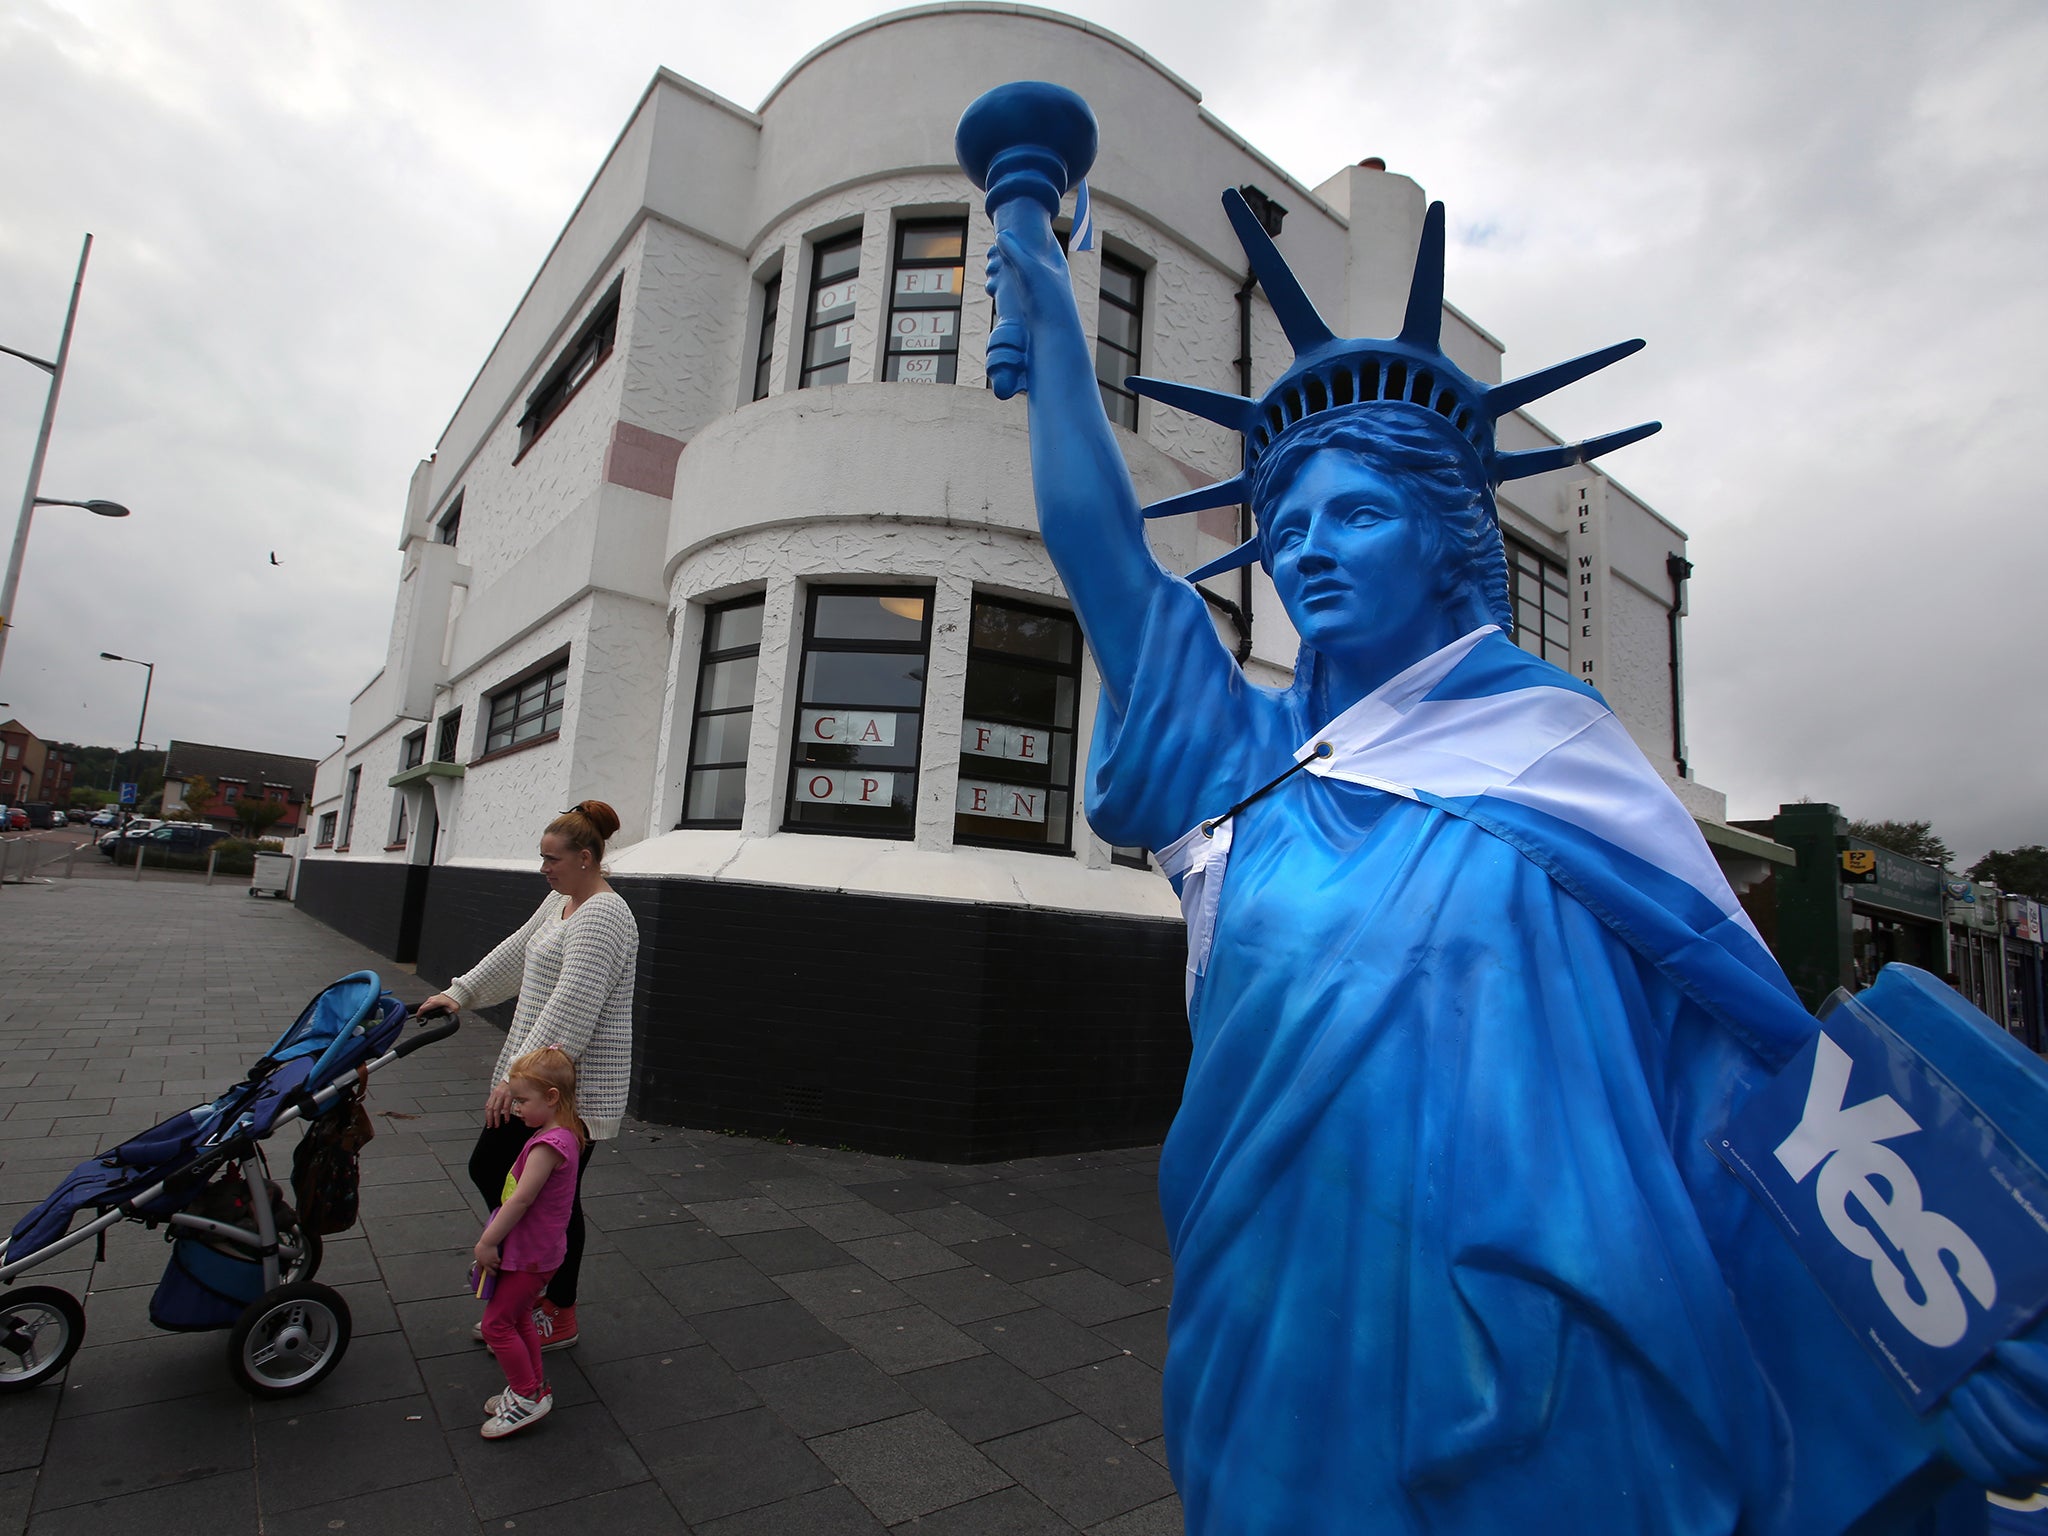 A YES campaign Statue of Liberty on display in Niddrie, a suburb of Edinburgh